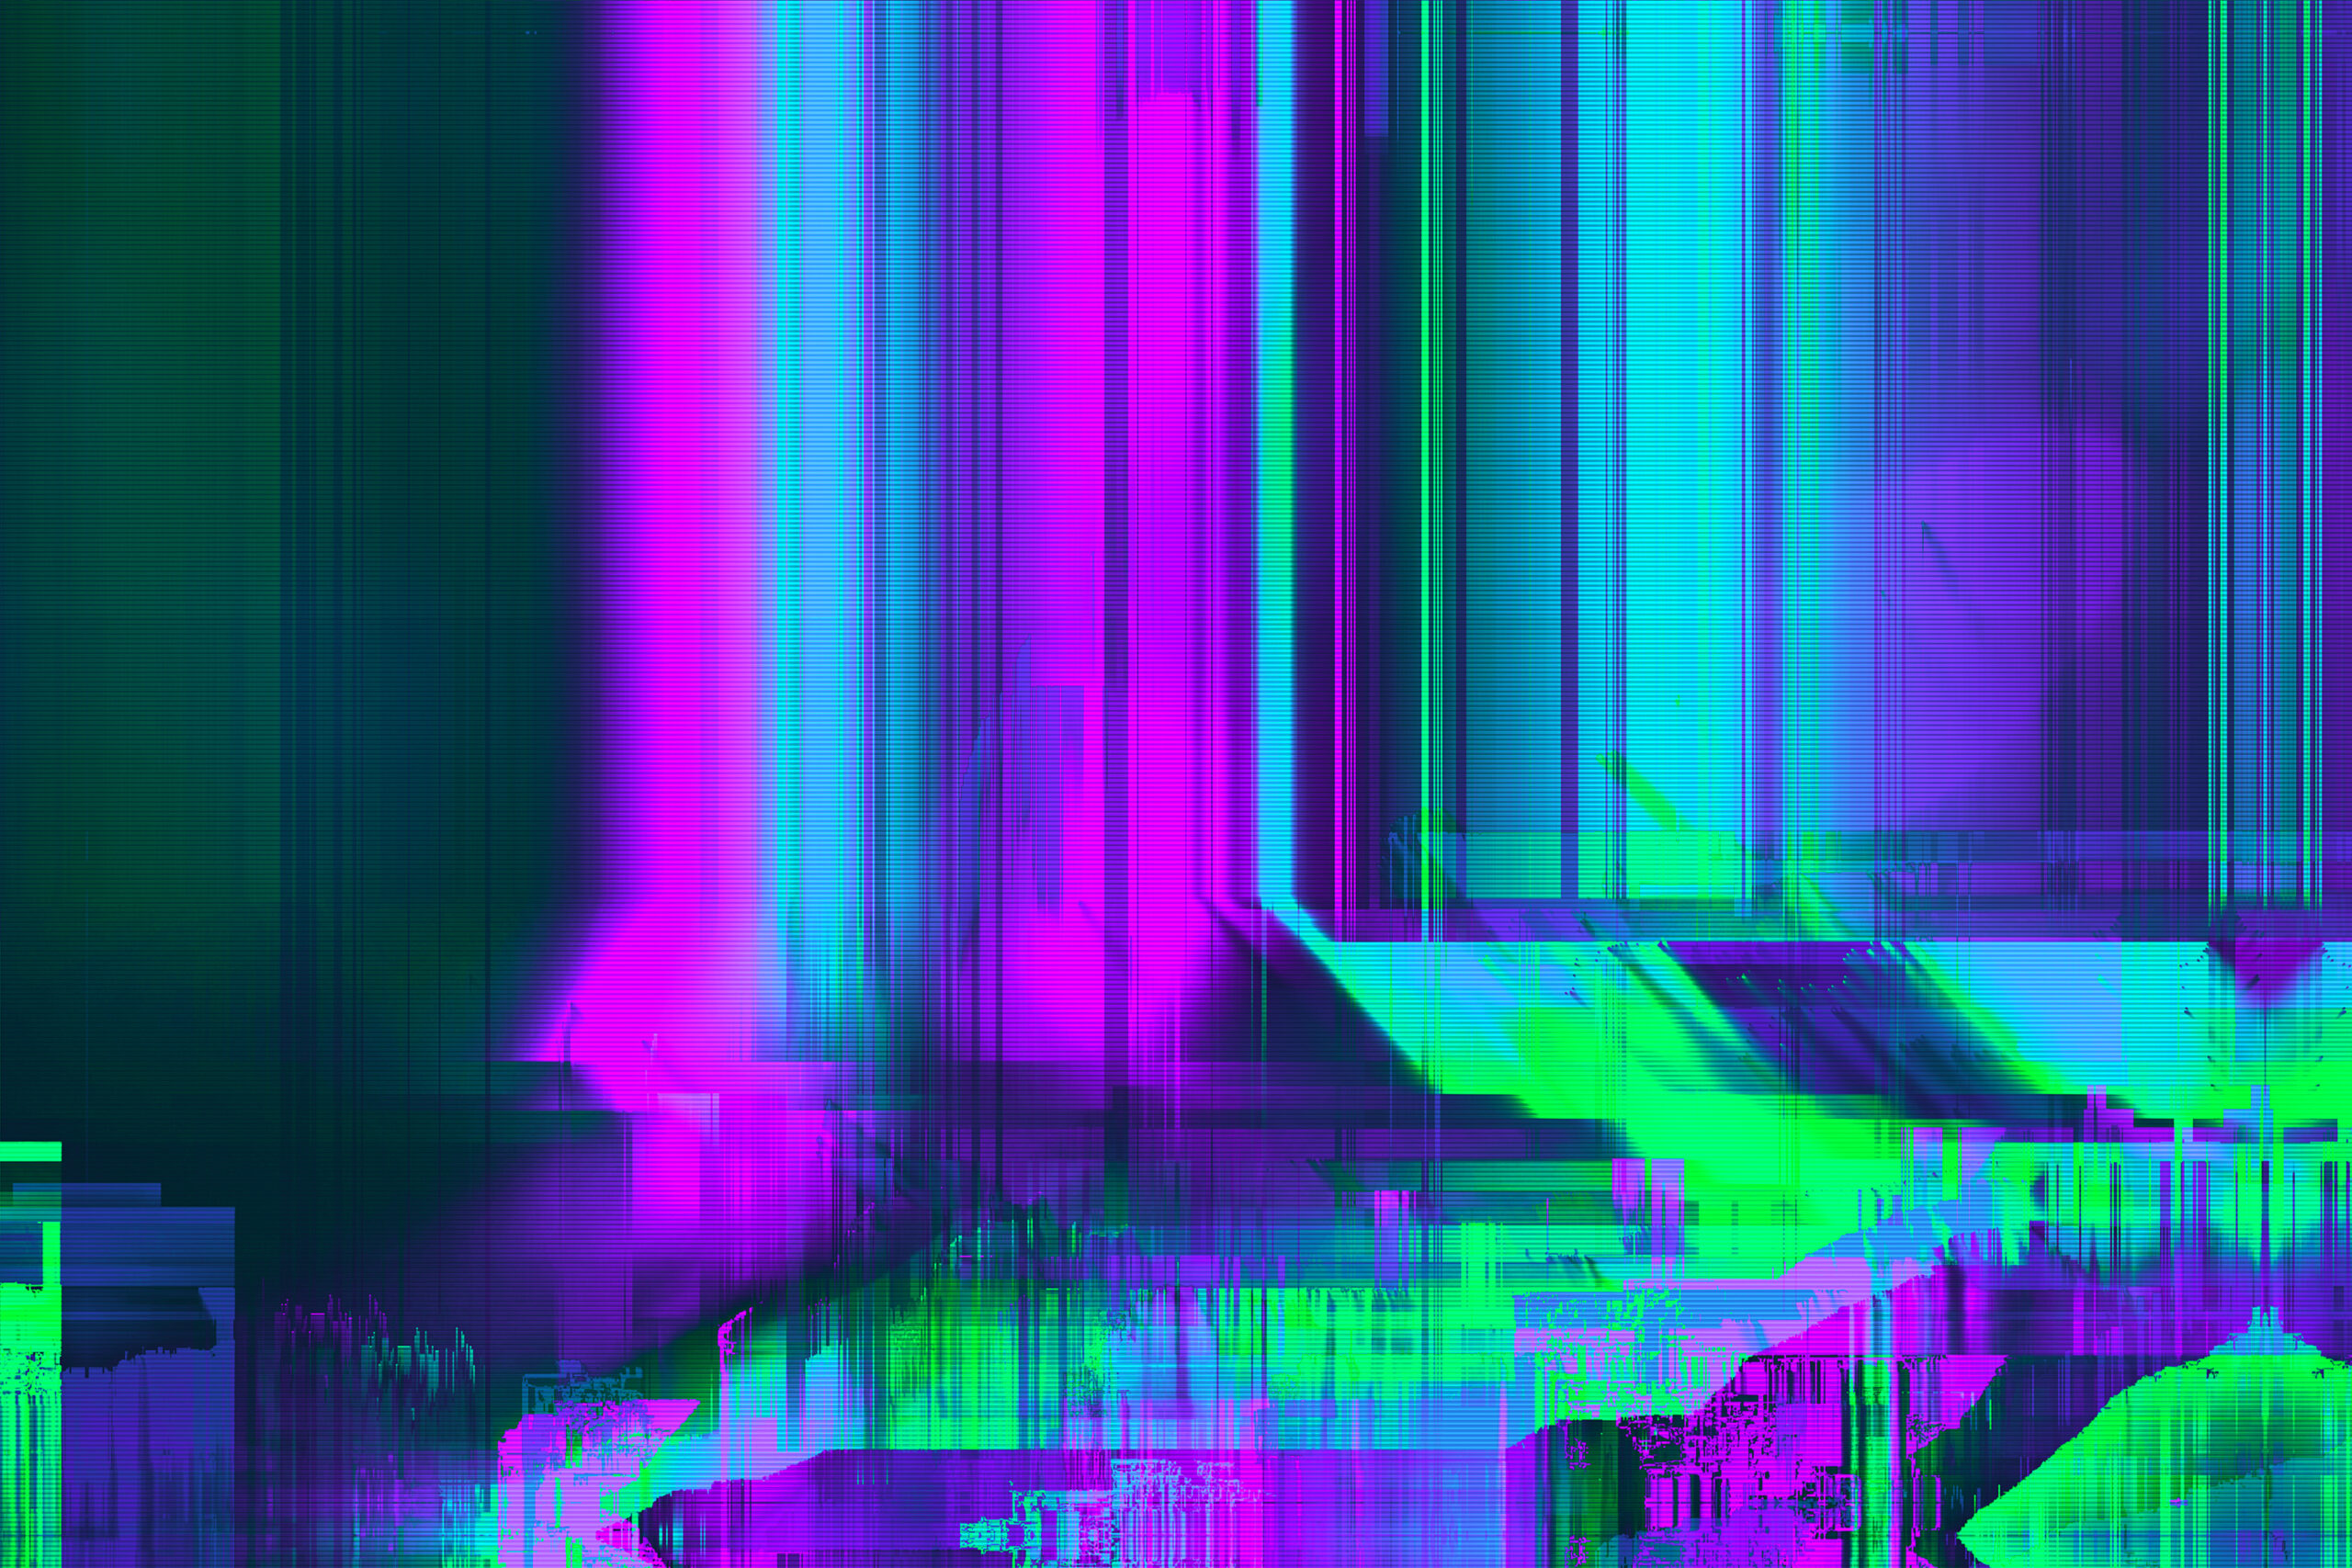 Abstract blue, purple and pink background with interlaced digital Distorted Motion glitch effect. Futuristic cyberpunk design. Retro futurism, webpunk, rave 80s 90s aesthetic techno neon colors